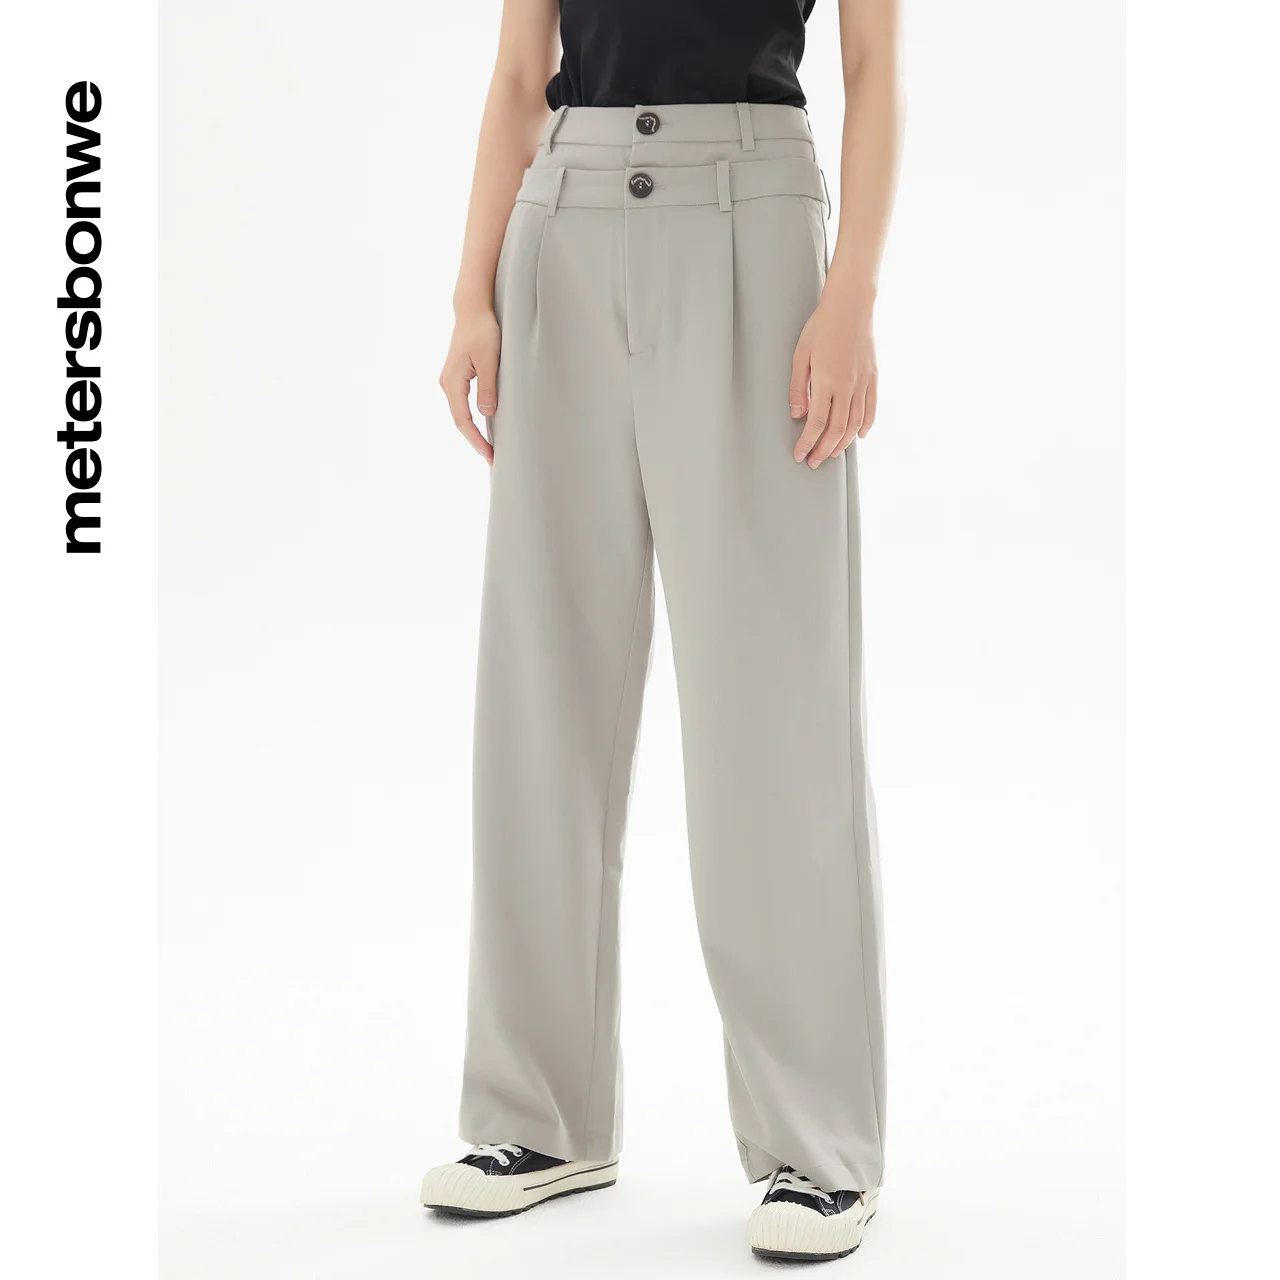 Metersbonwe Female Basic Double Waist Head Woven Wide Leg Trousers Women Spring Straight Hight Quanlity Office Lady Baggy Pants